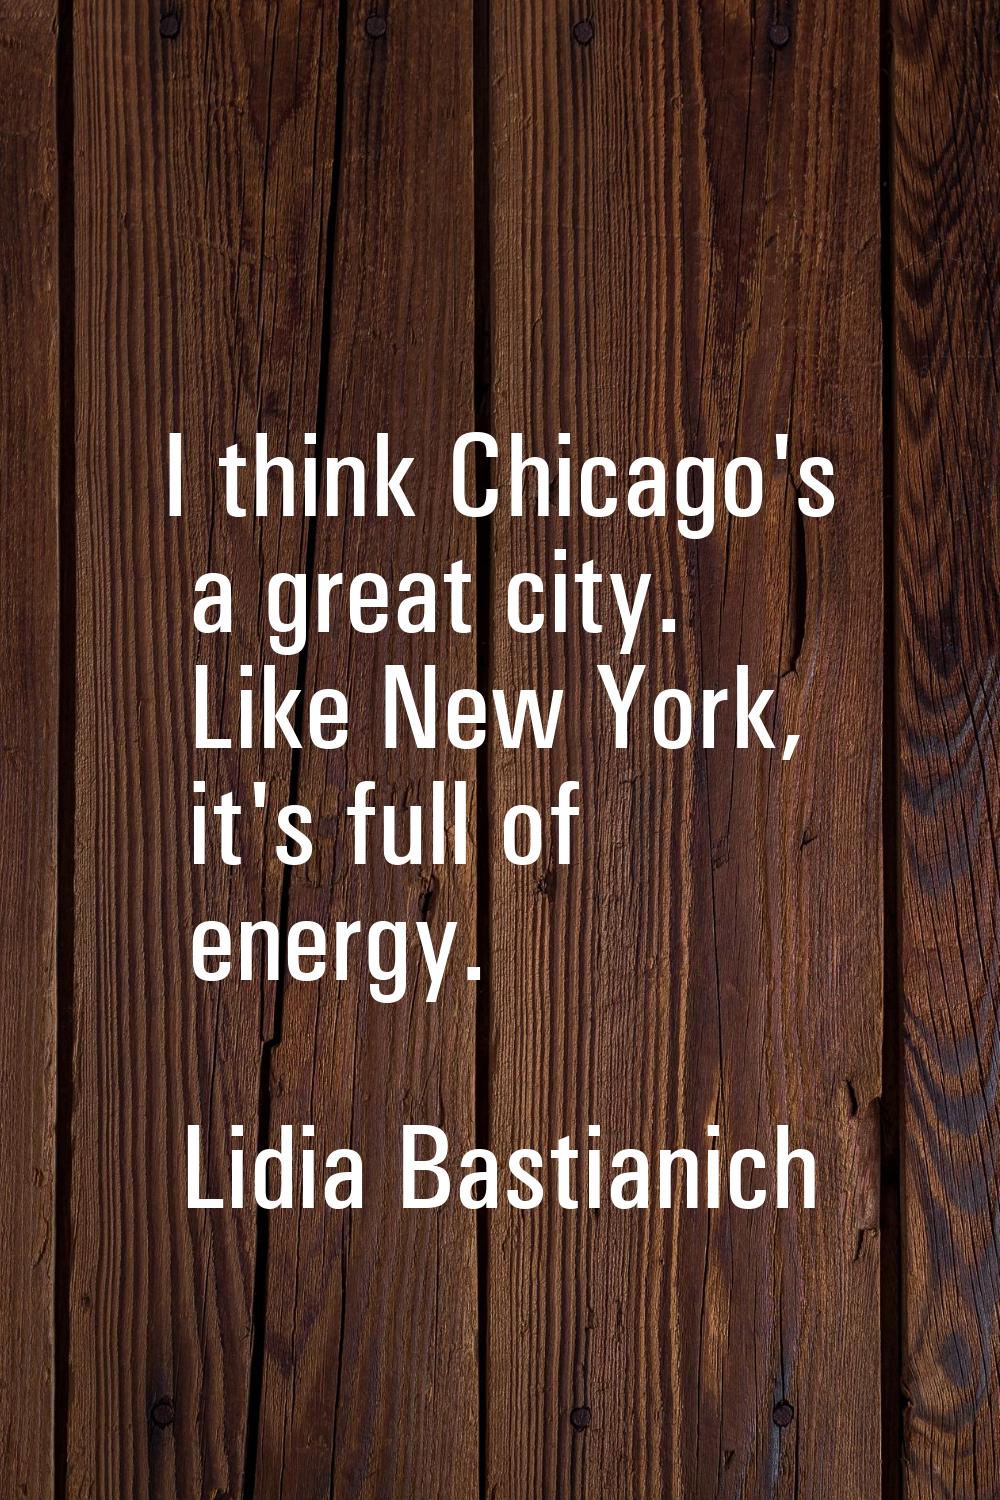 I think Chicago's a great city. Like New York, it's full of energy.